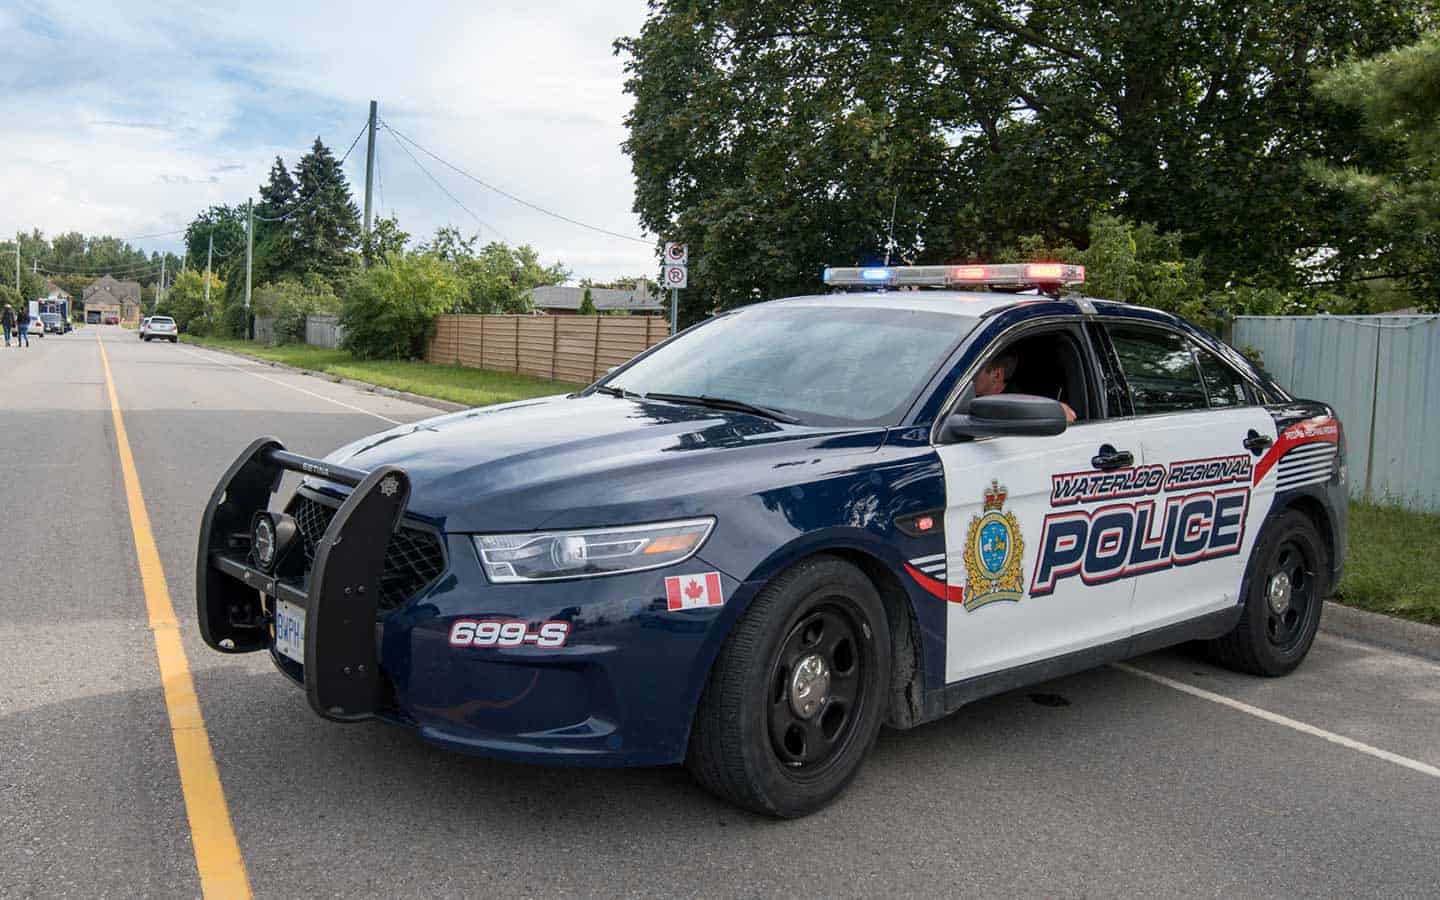                      Police arrest two youths after responding to Kitchener break-in                             
                     